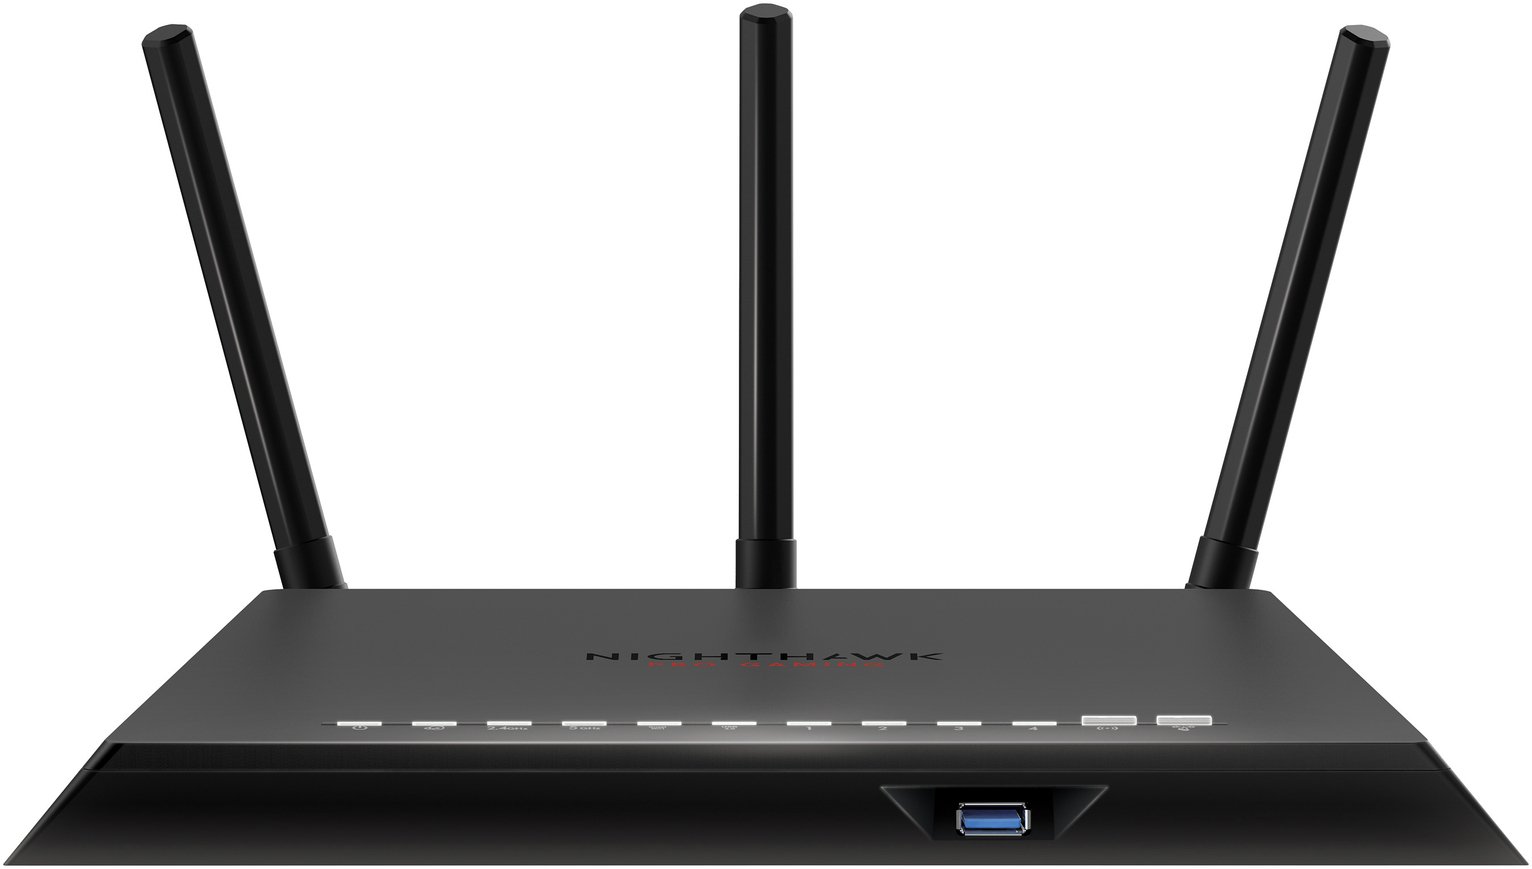 Netgear AC1750 Nighthawk Dual-Band Gaming Router Review